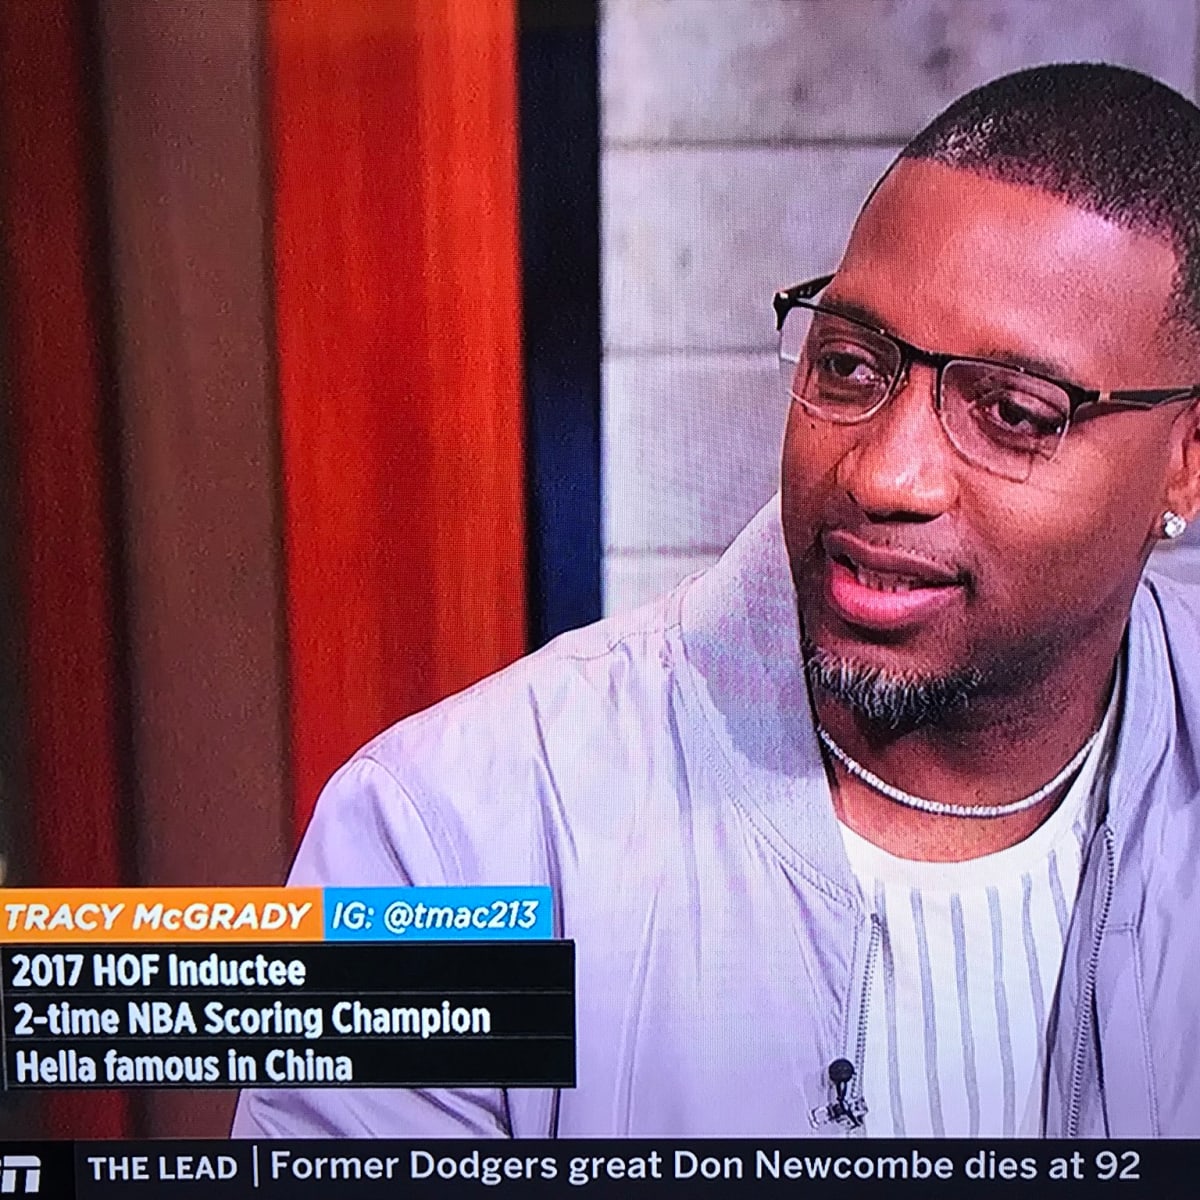 Tracy McGrady on Hall of Fame induction: 'This is my championship